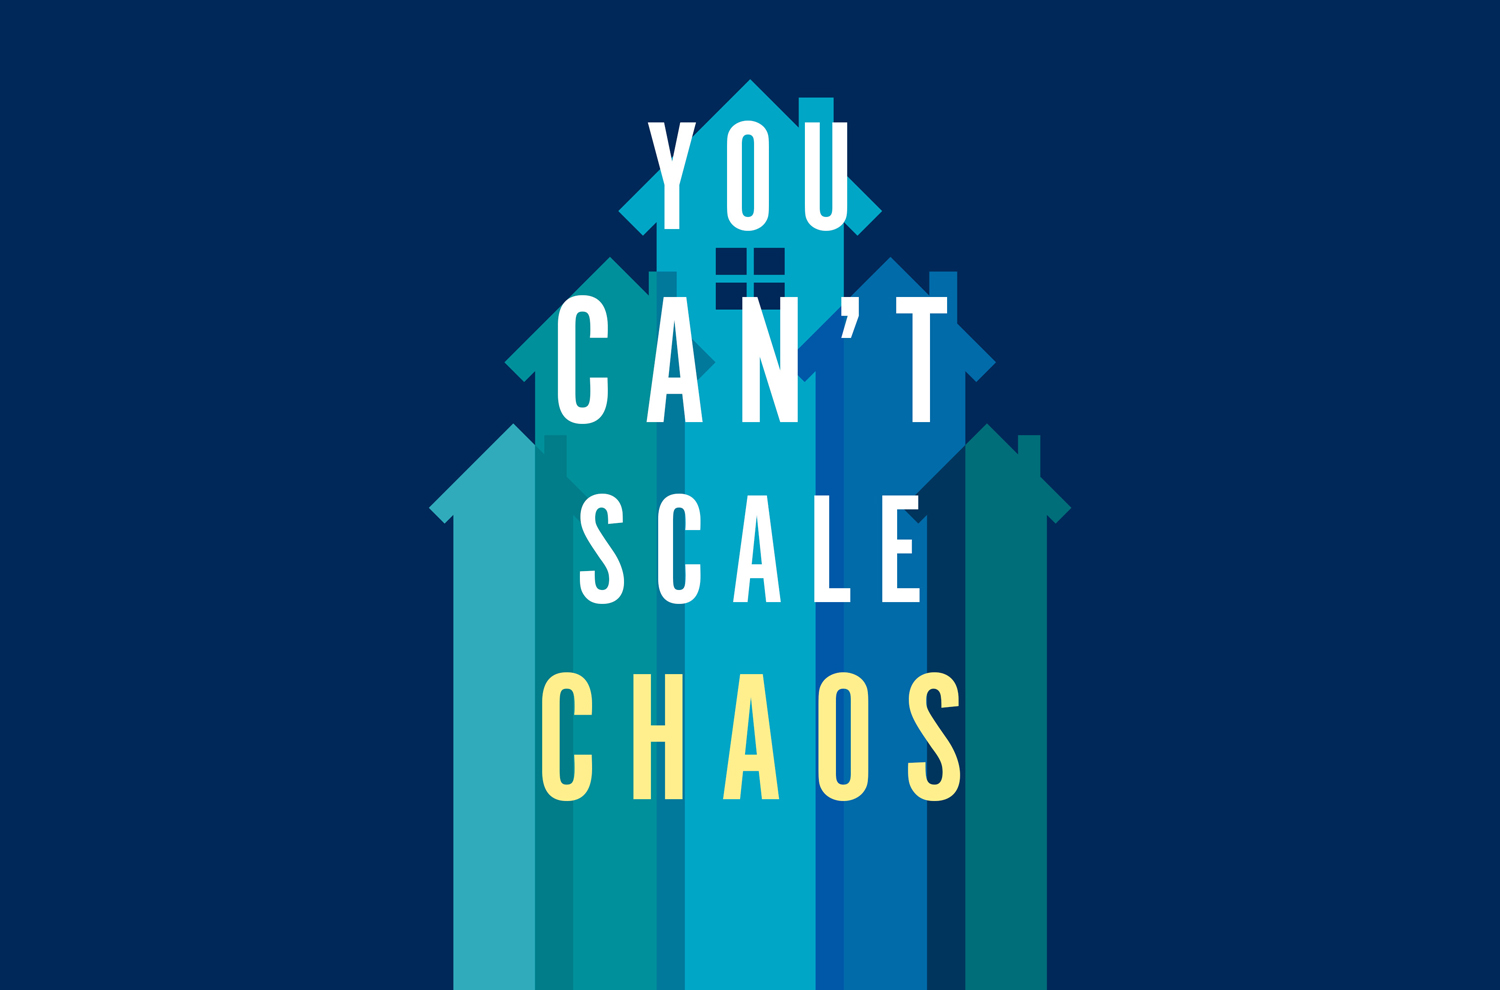 You can't scale chaos